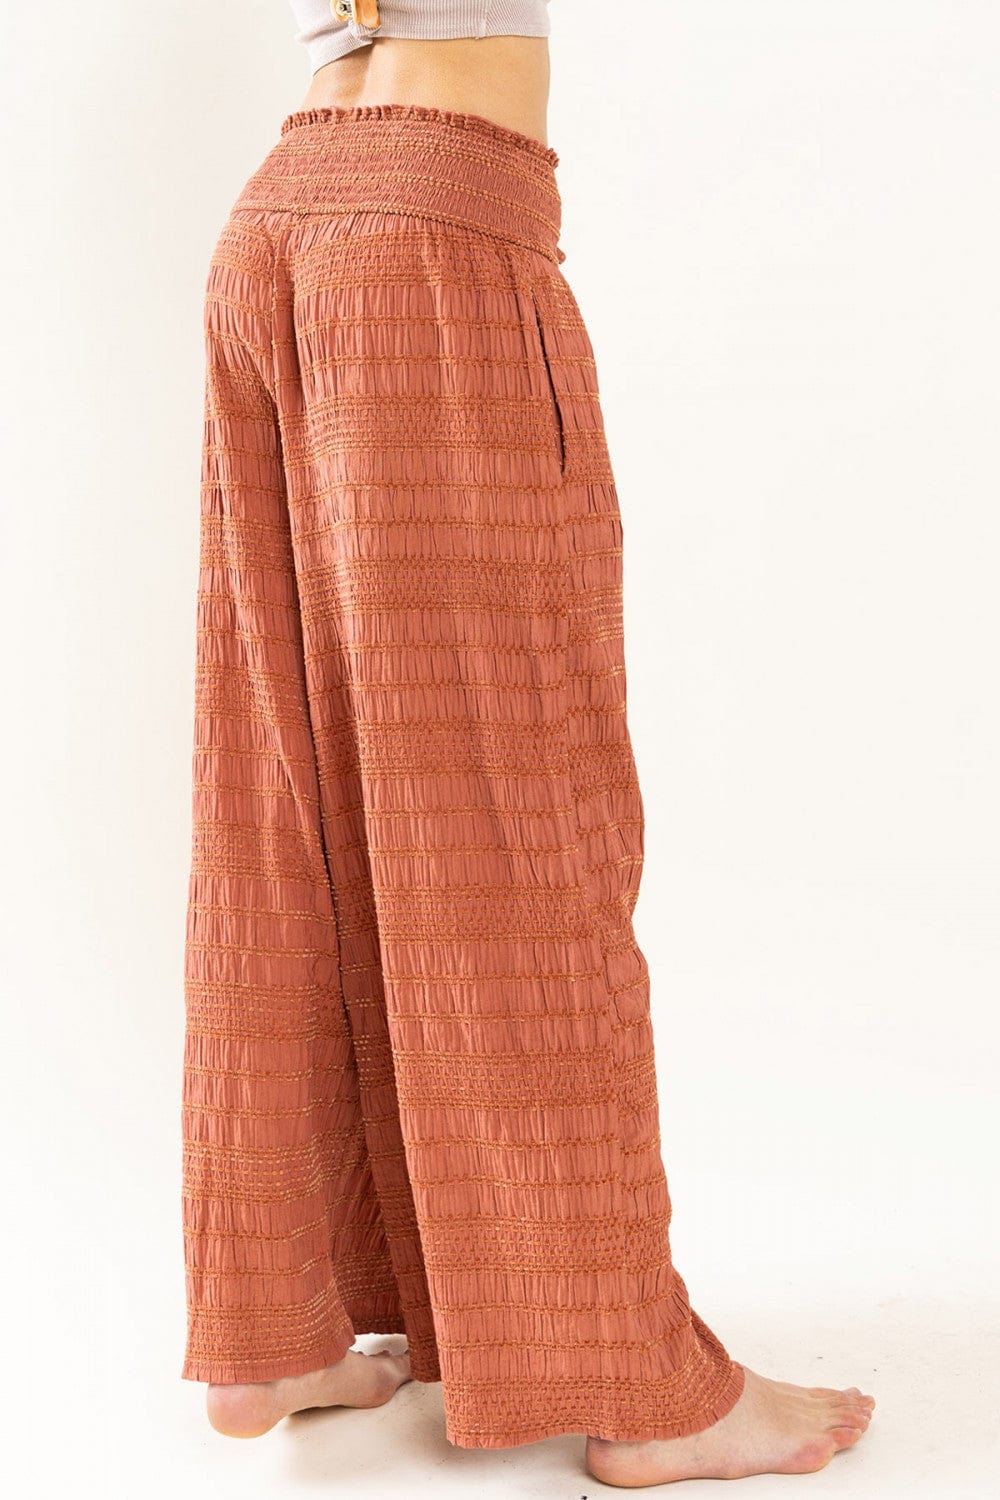 Ces Femme Textured Fabric Smocked Solid Wide Pants